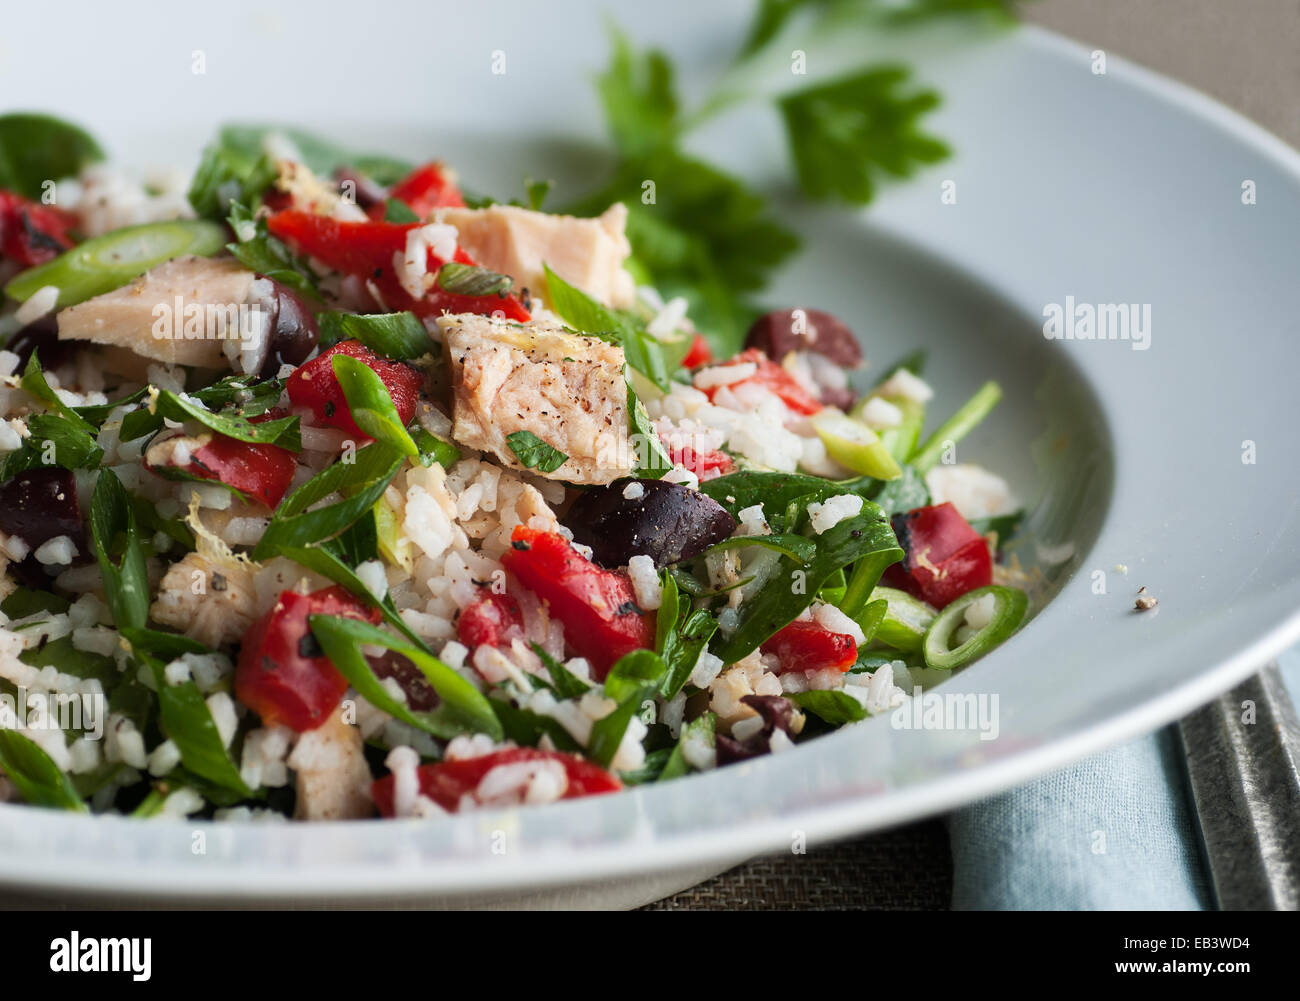 Albacore tuna salad with rice and vegetables Stock Photo